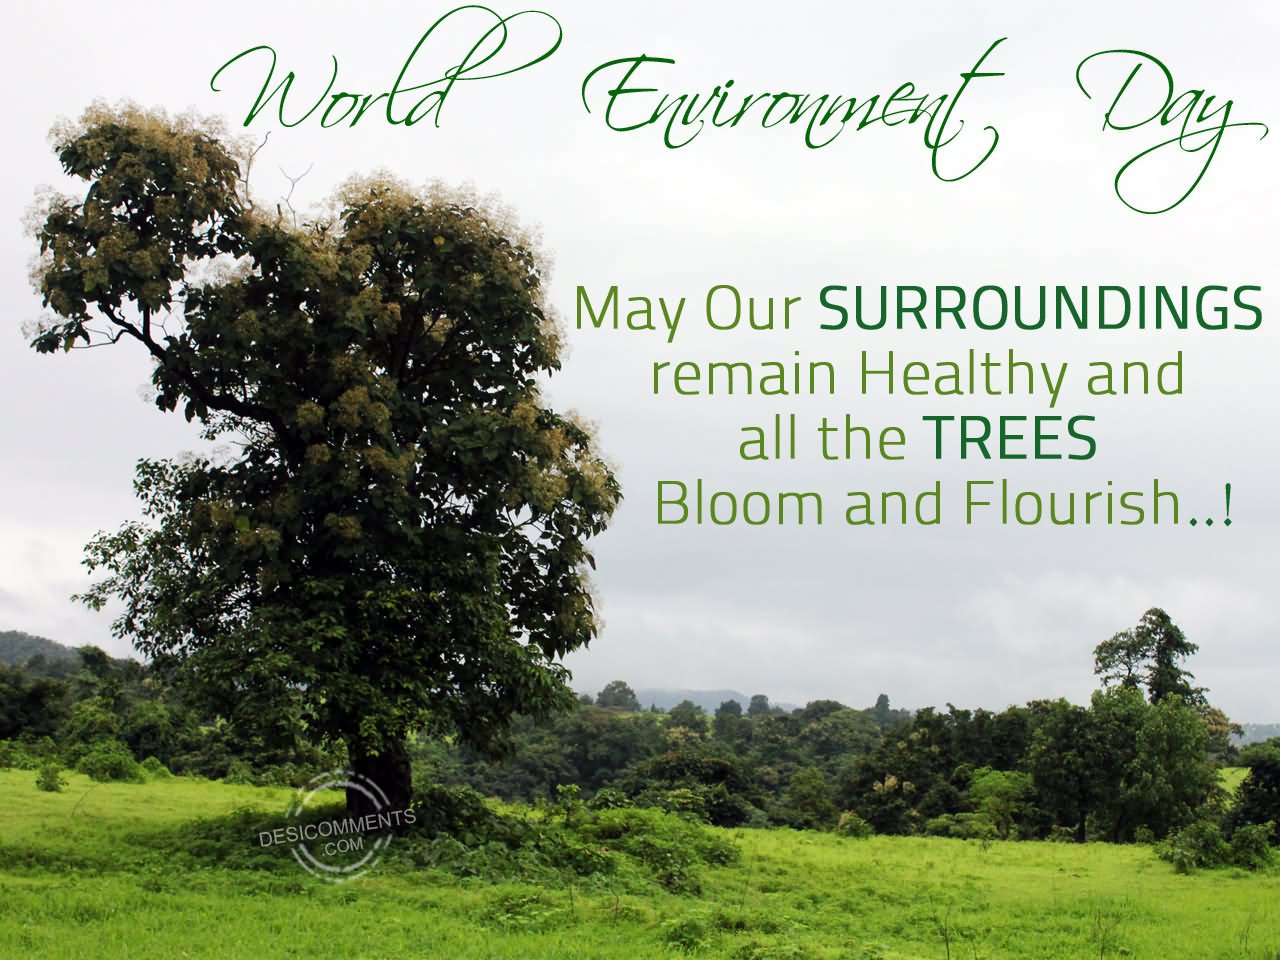 World Environment Day May Our Surroundings Remain Healthy And All The Trees Bloom And Flourish